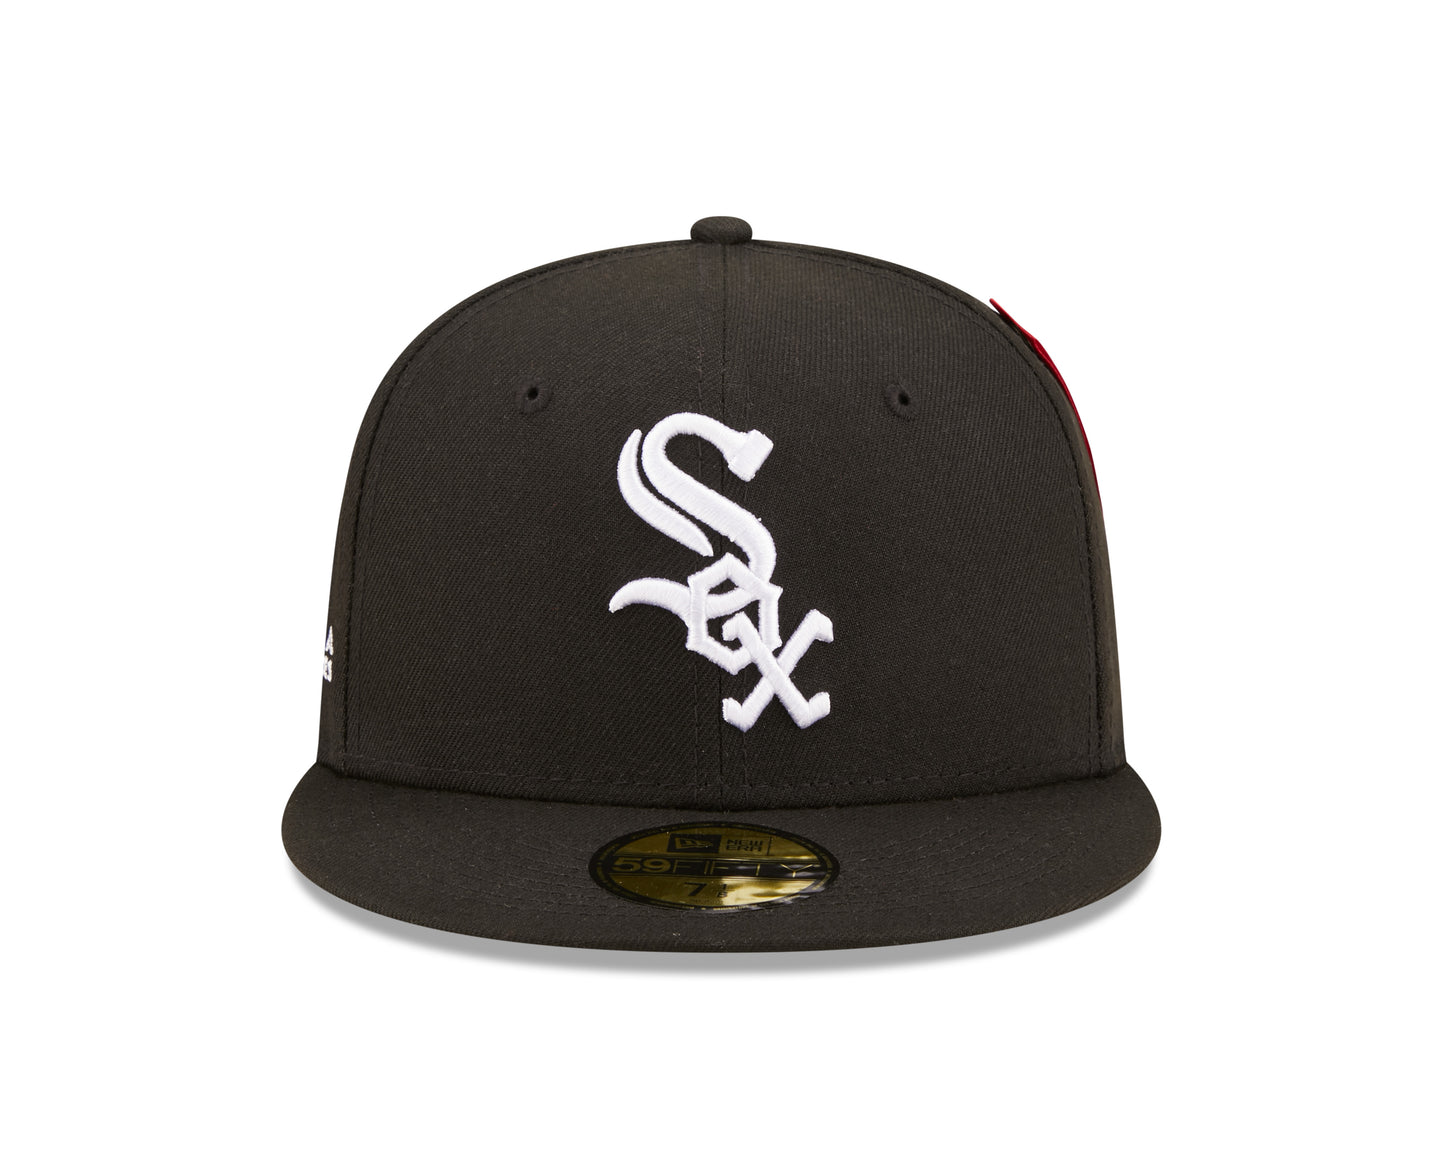 Chicago White Sox New Era Alpha Industries 59FIFTY Fitted Hat- Black